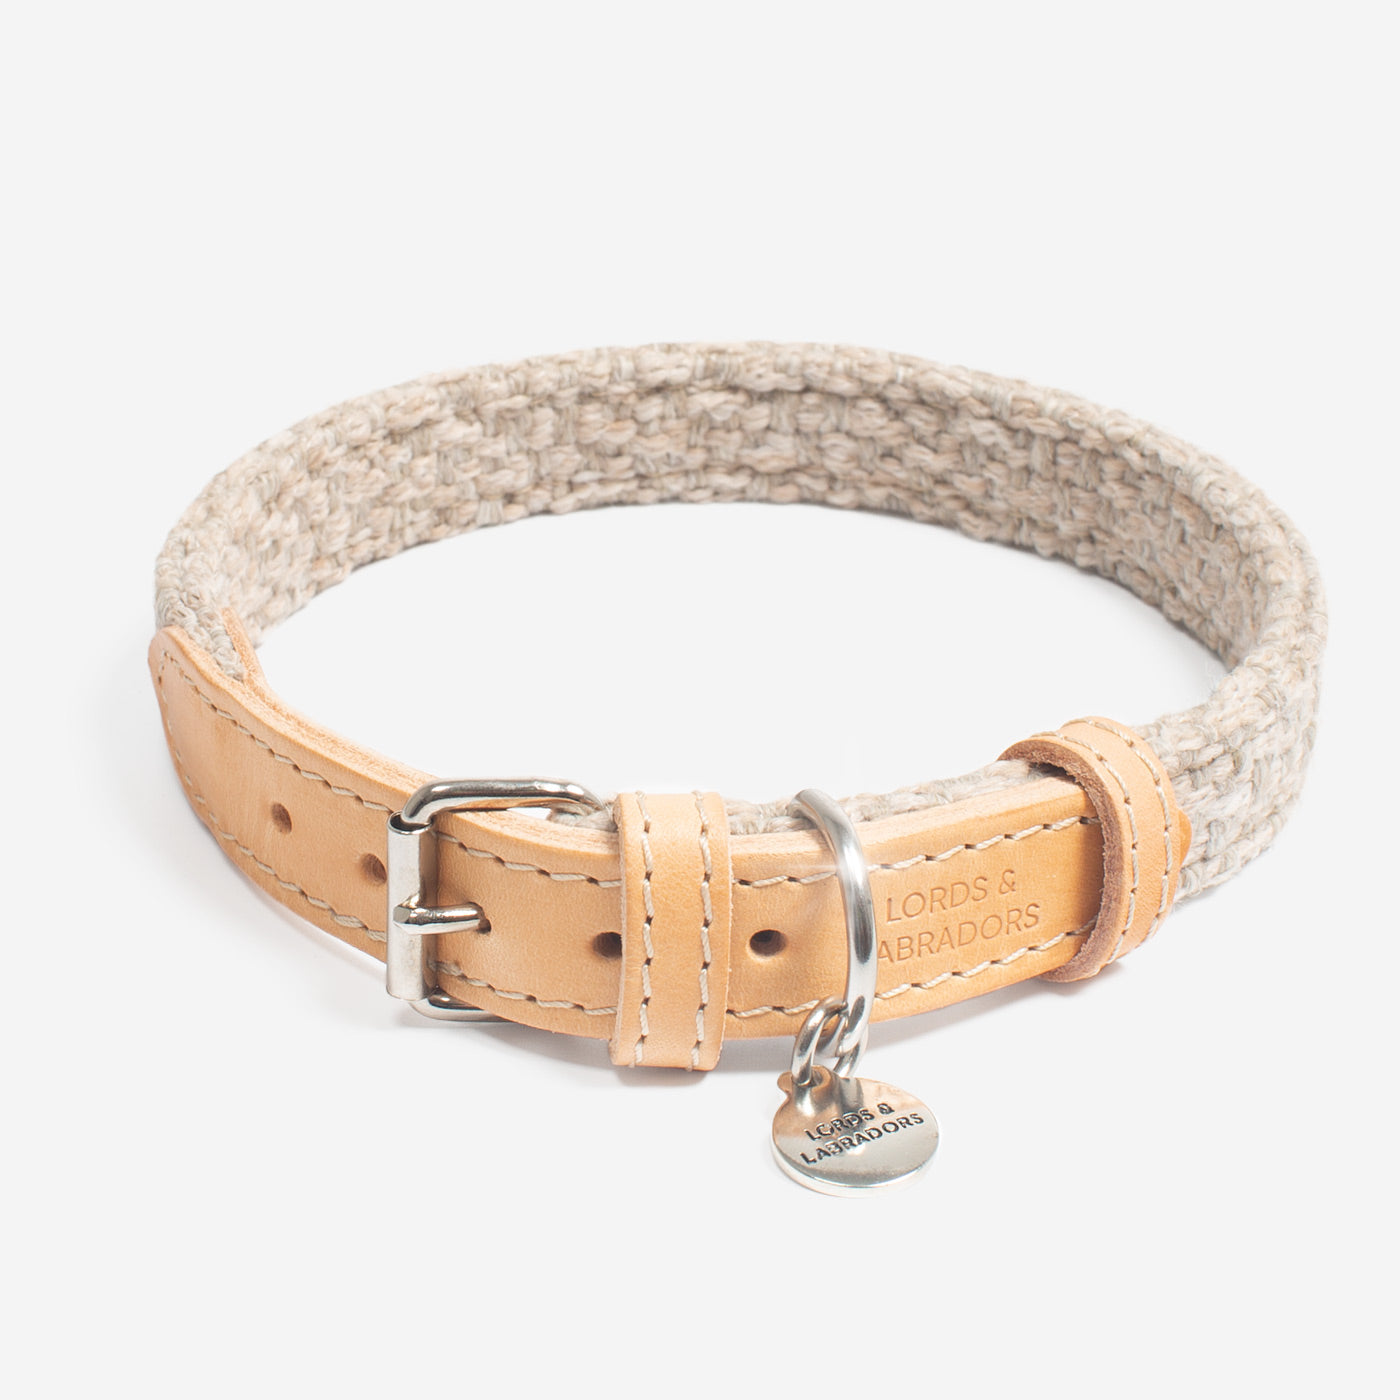 Discover dog walking luxury with our handcrafted Italian dog collar in beautiful sandstone with woven sand fabric! The perfect collar for dogs available now at Lords & Labradors US